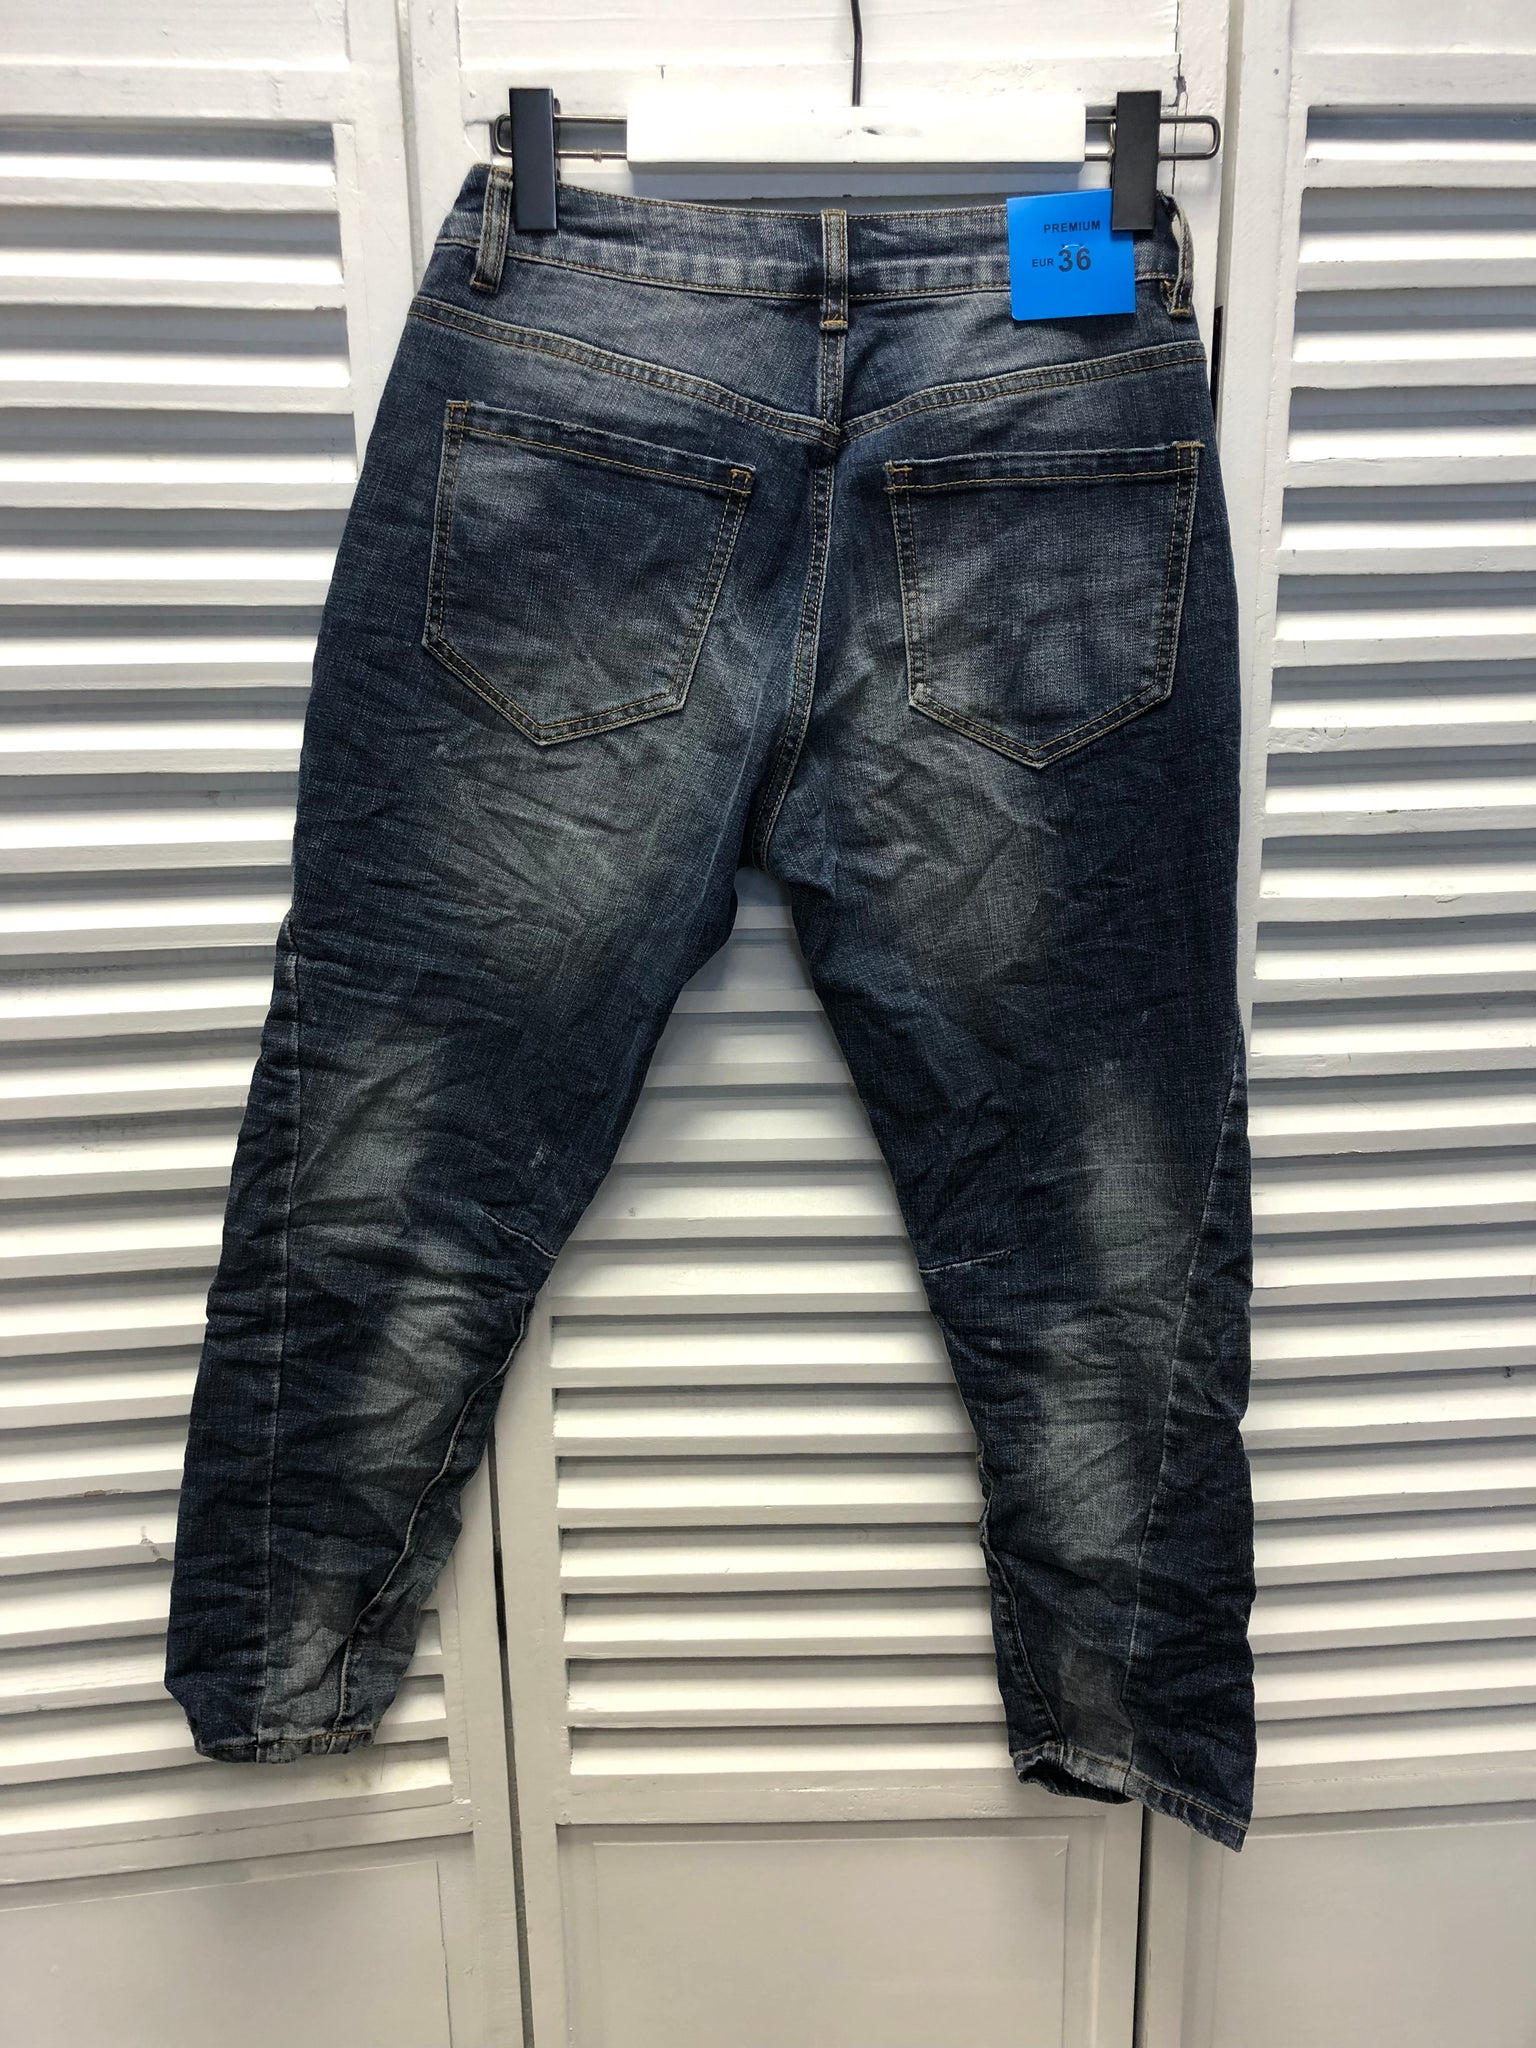 Jeans in Wasted/Destroyed-Look in Dunkelblau aus Baumwolle H1824